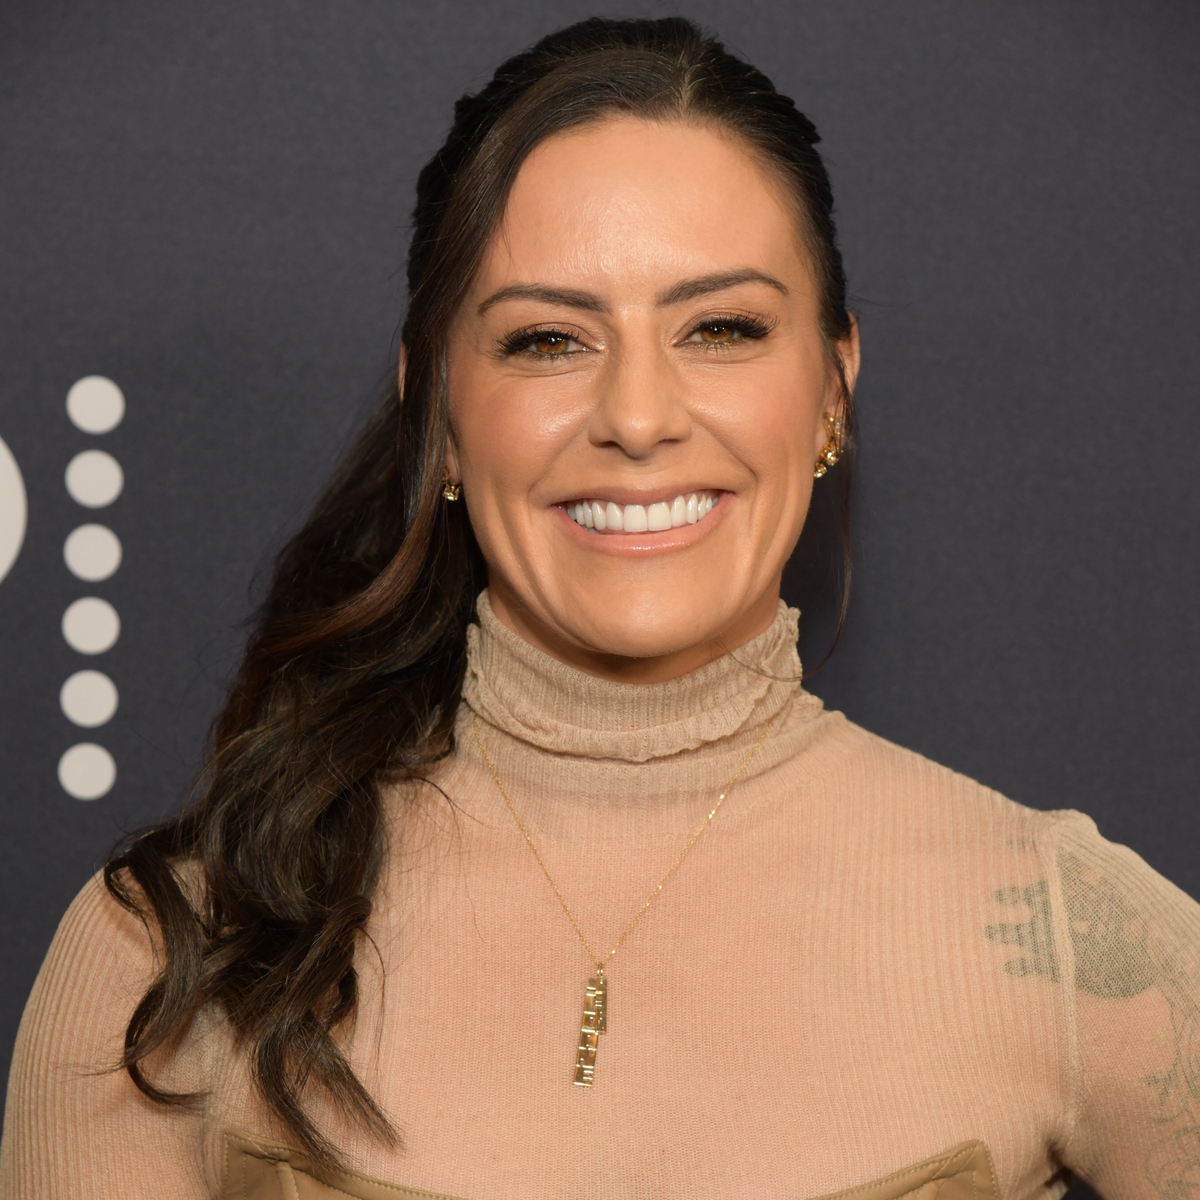 Ali Krieger Details Her “New Chapter” After Year of Change